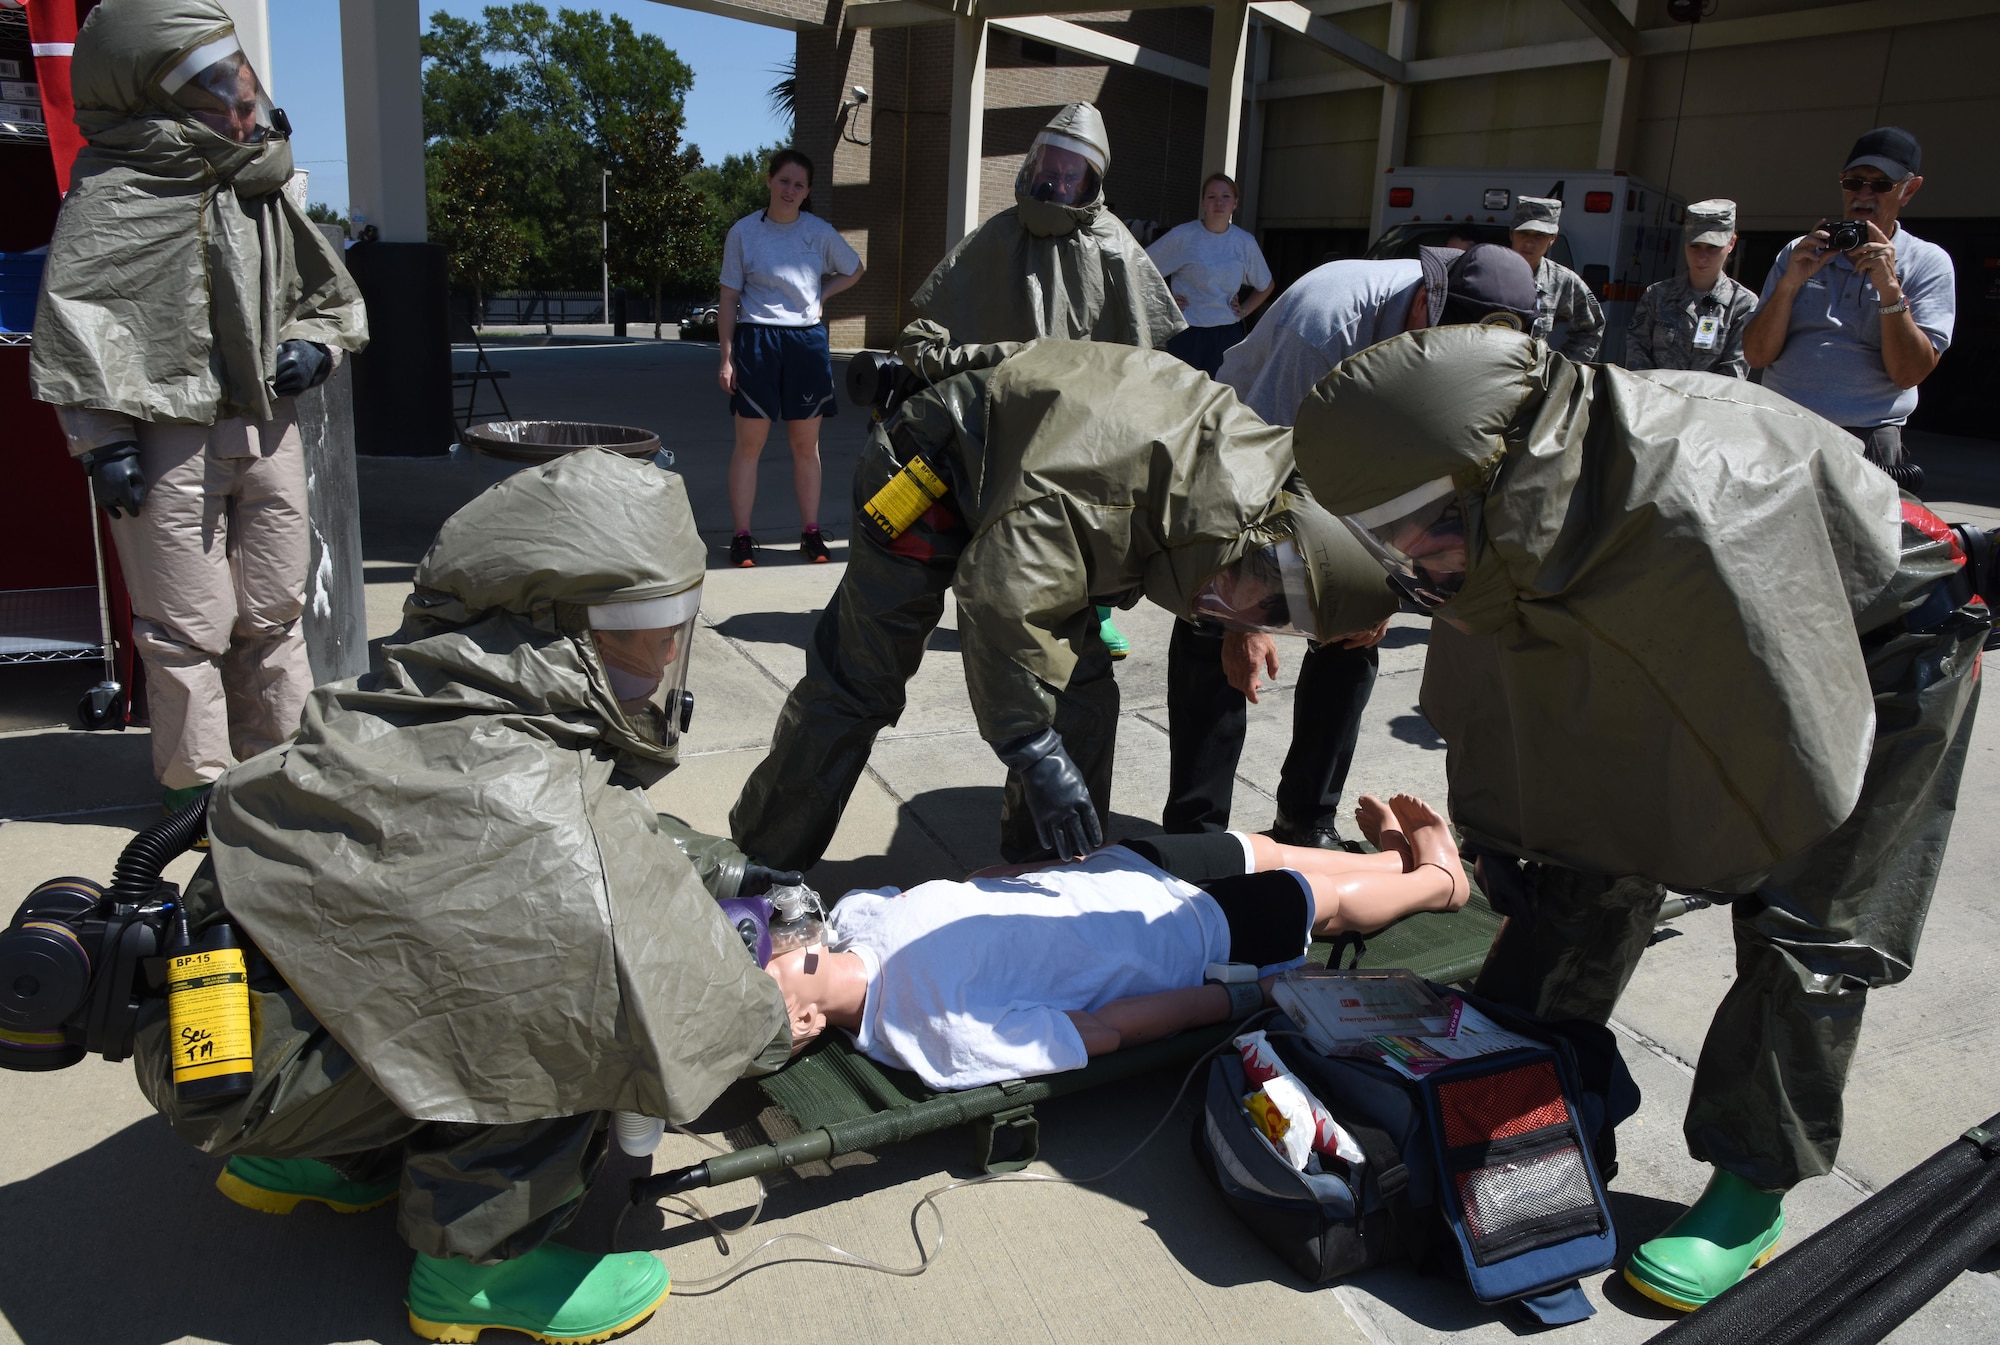 Members of the 81st Medical Group administer triage to a “patient” during the 81st MDG integrated in-place patient decontamination training course behind the Keesler Medical Center Sept. 14, 2017, on Keesler Air Force Base, Mississippi. The two-day course trained 21 personnel, which came from four different disaster medical teams: IPPD, triage, manpower and security. Throughout the training, they learned to utilize Keesler’s fixed decontamination facility and how to set up and tear down the decontamination tent. (U.S. Air Force photo by Kemberly Groue)